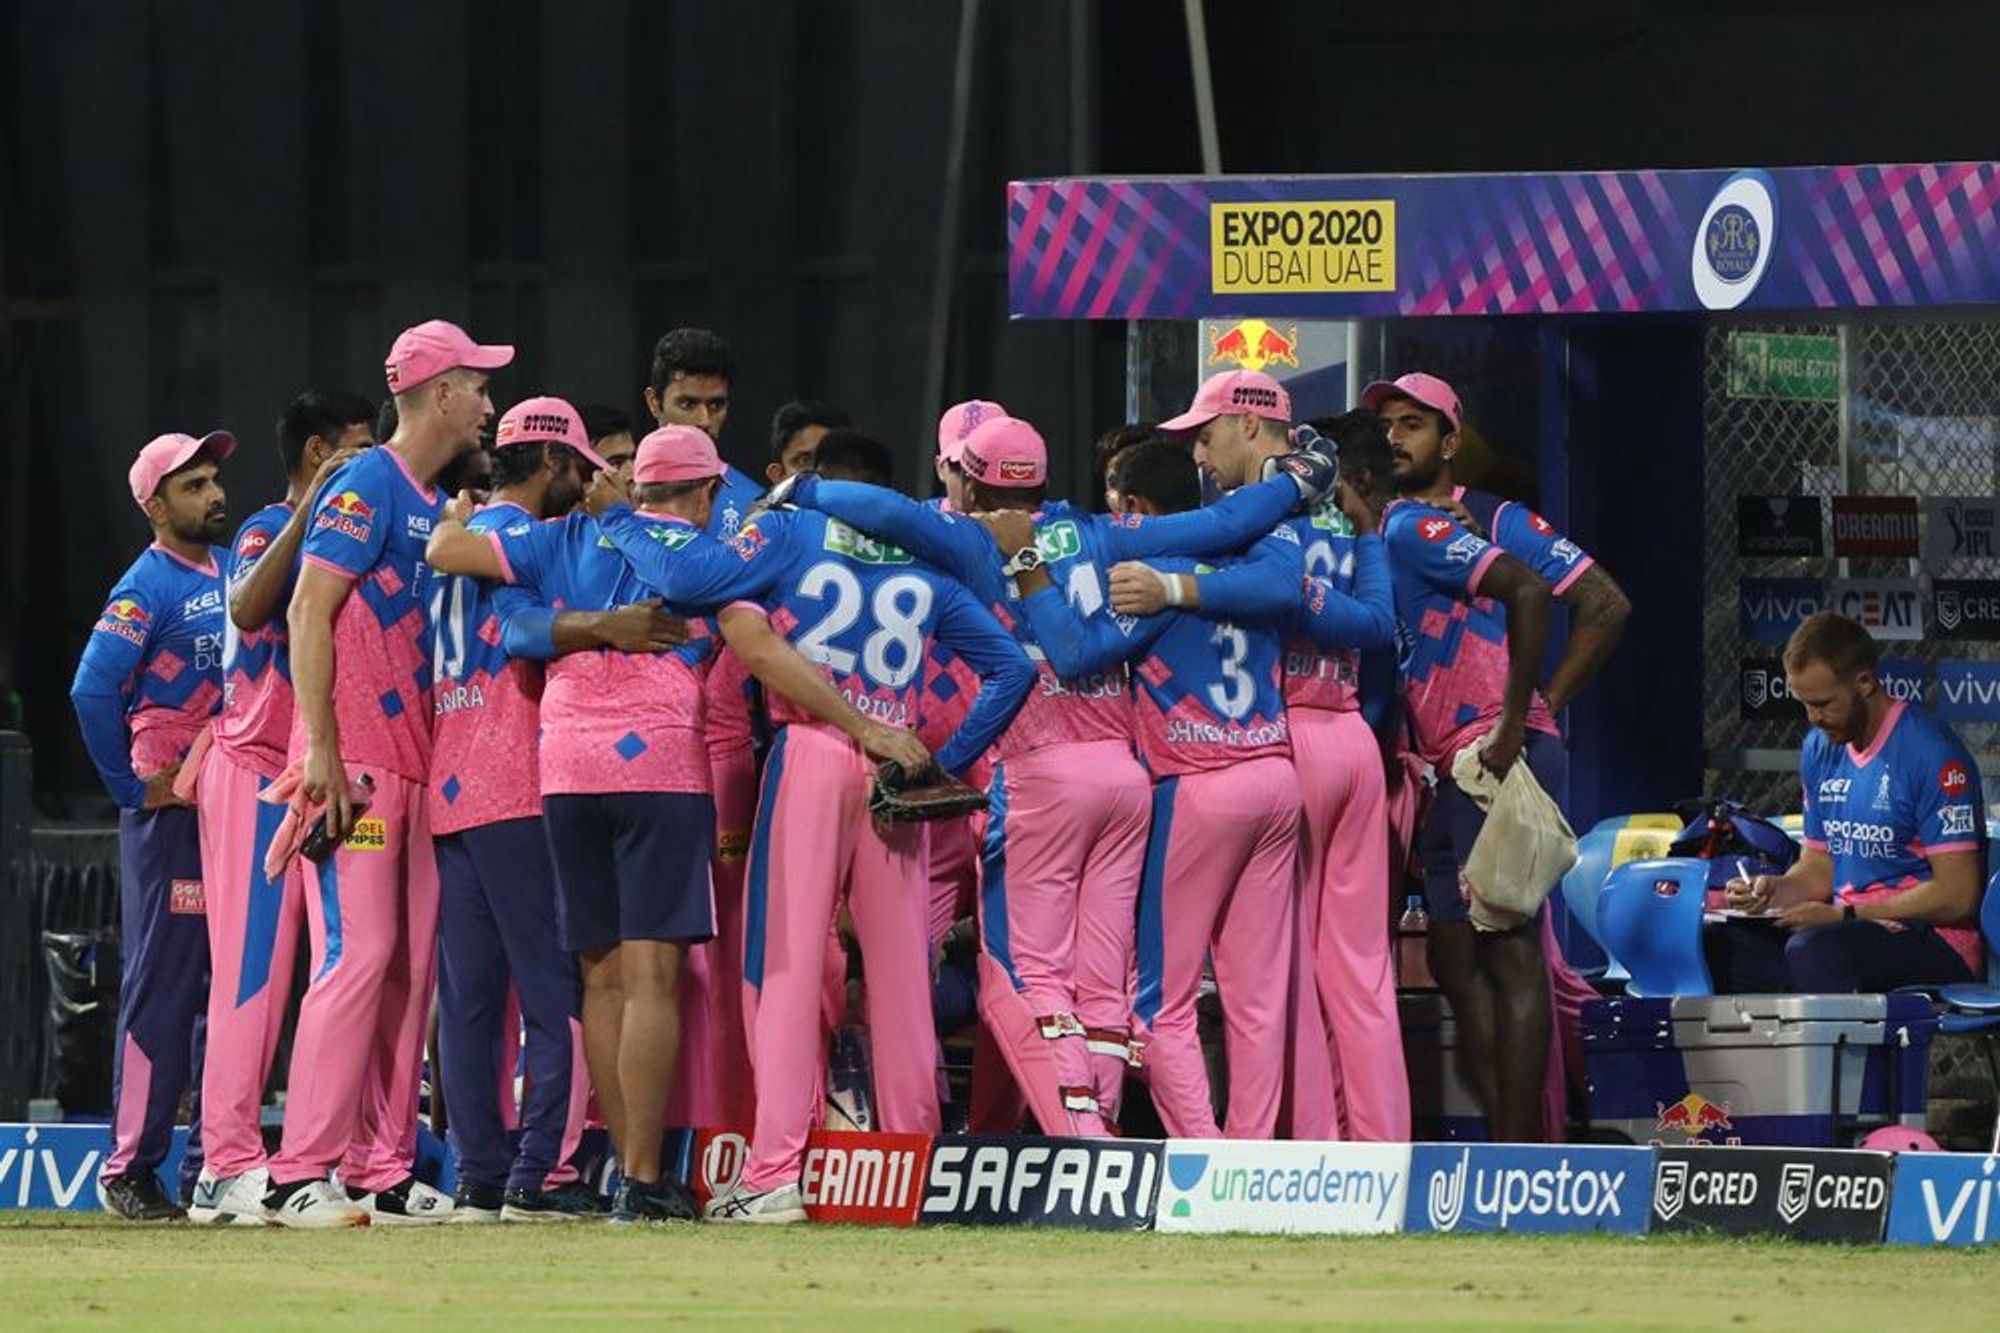 Rajasthan Royals were thumped by RCB | BCCI/IPL